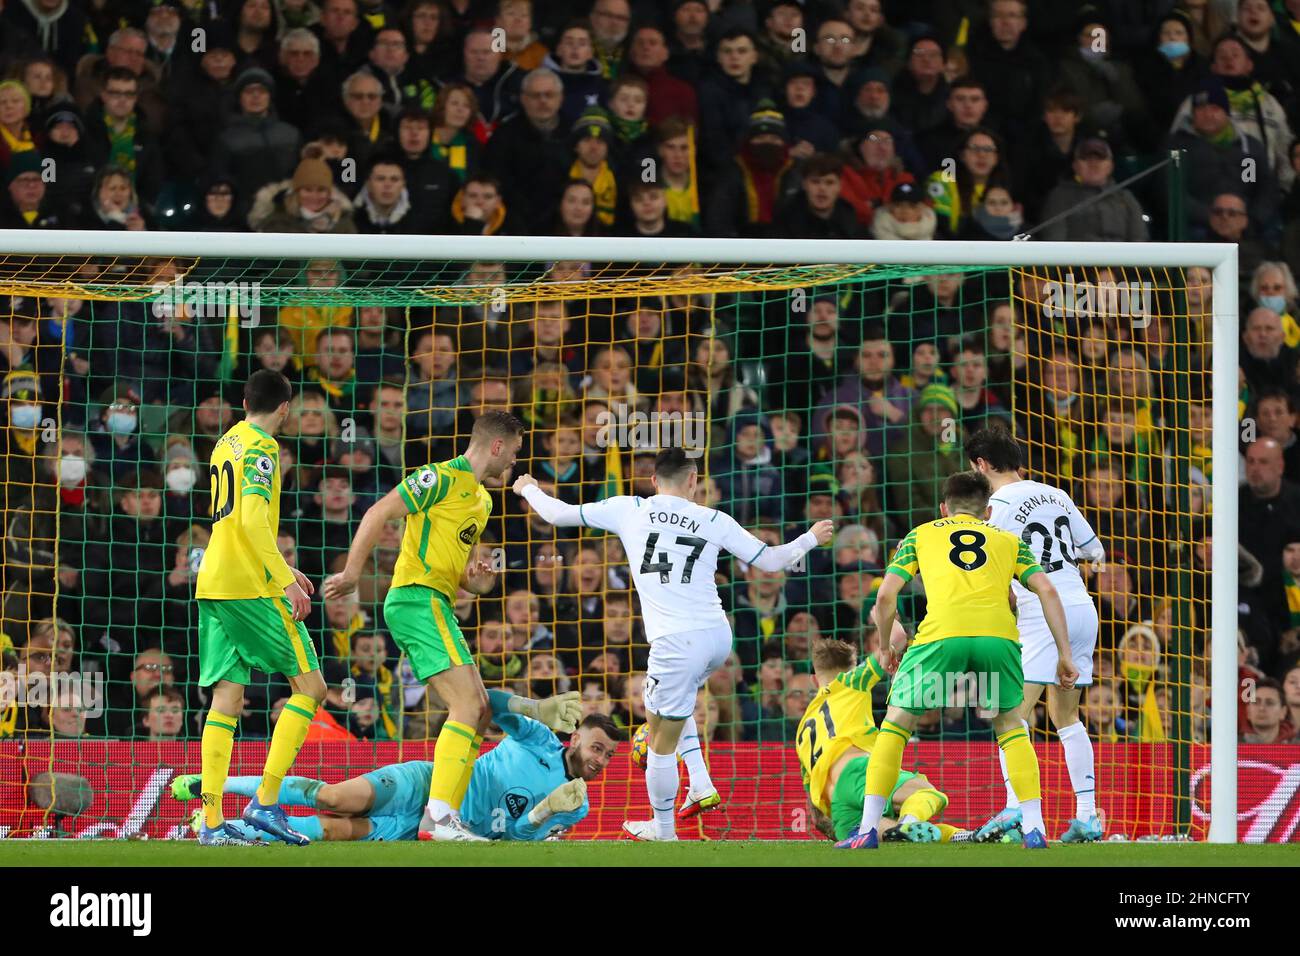 Phil Foden of Manchester City scores a goal to make 2-0 - Norwich City v Manchester City, Premier League, Carrow Road, Norwich, UK - 12th February 2022  Editorial Use Only - DataCo restrictions apply Stock Photo